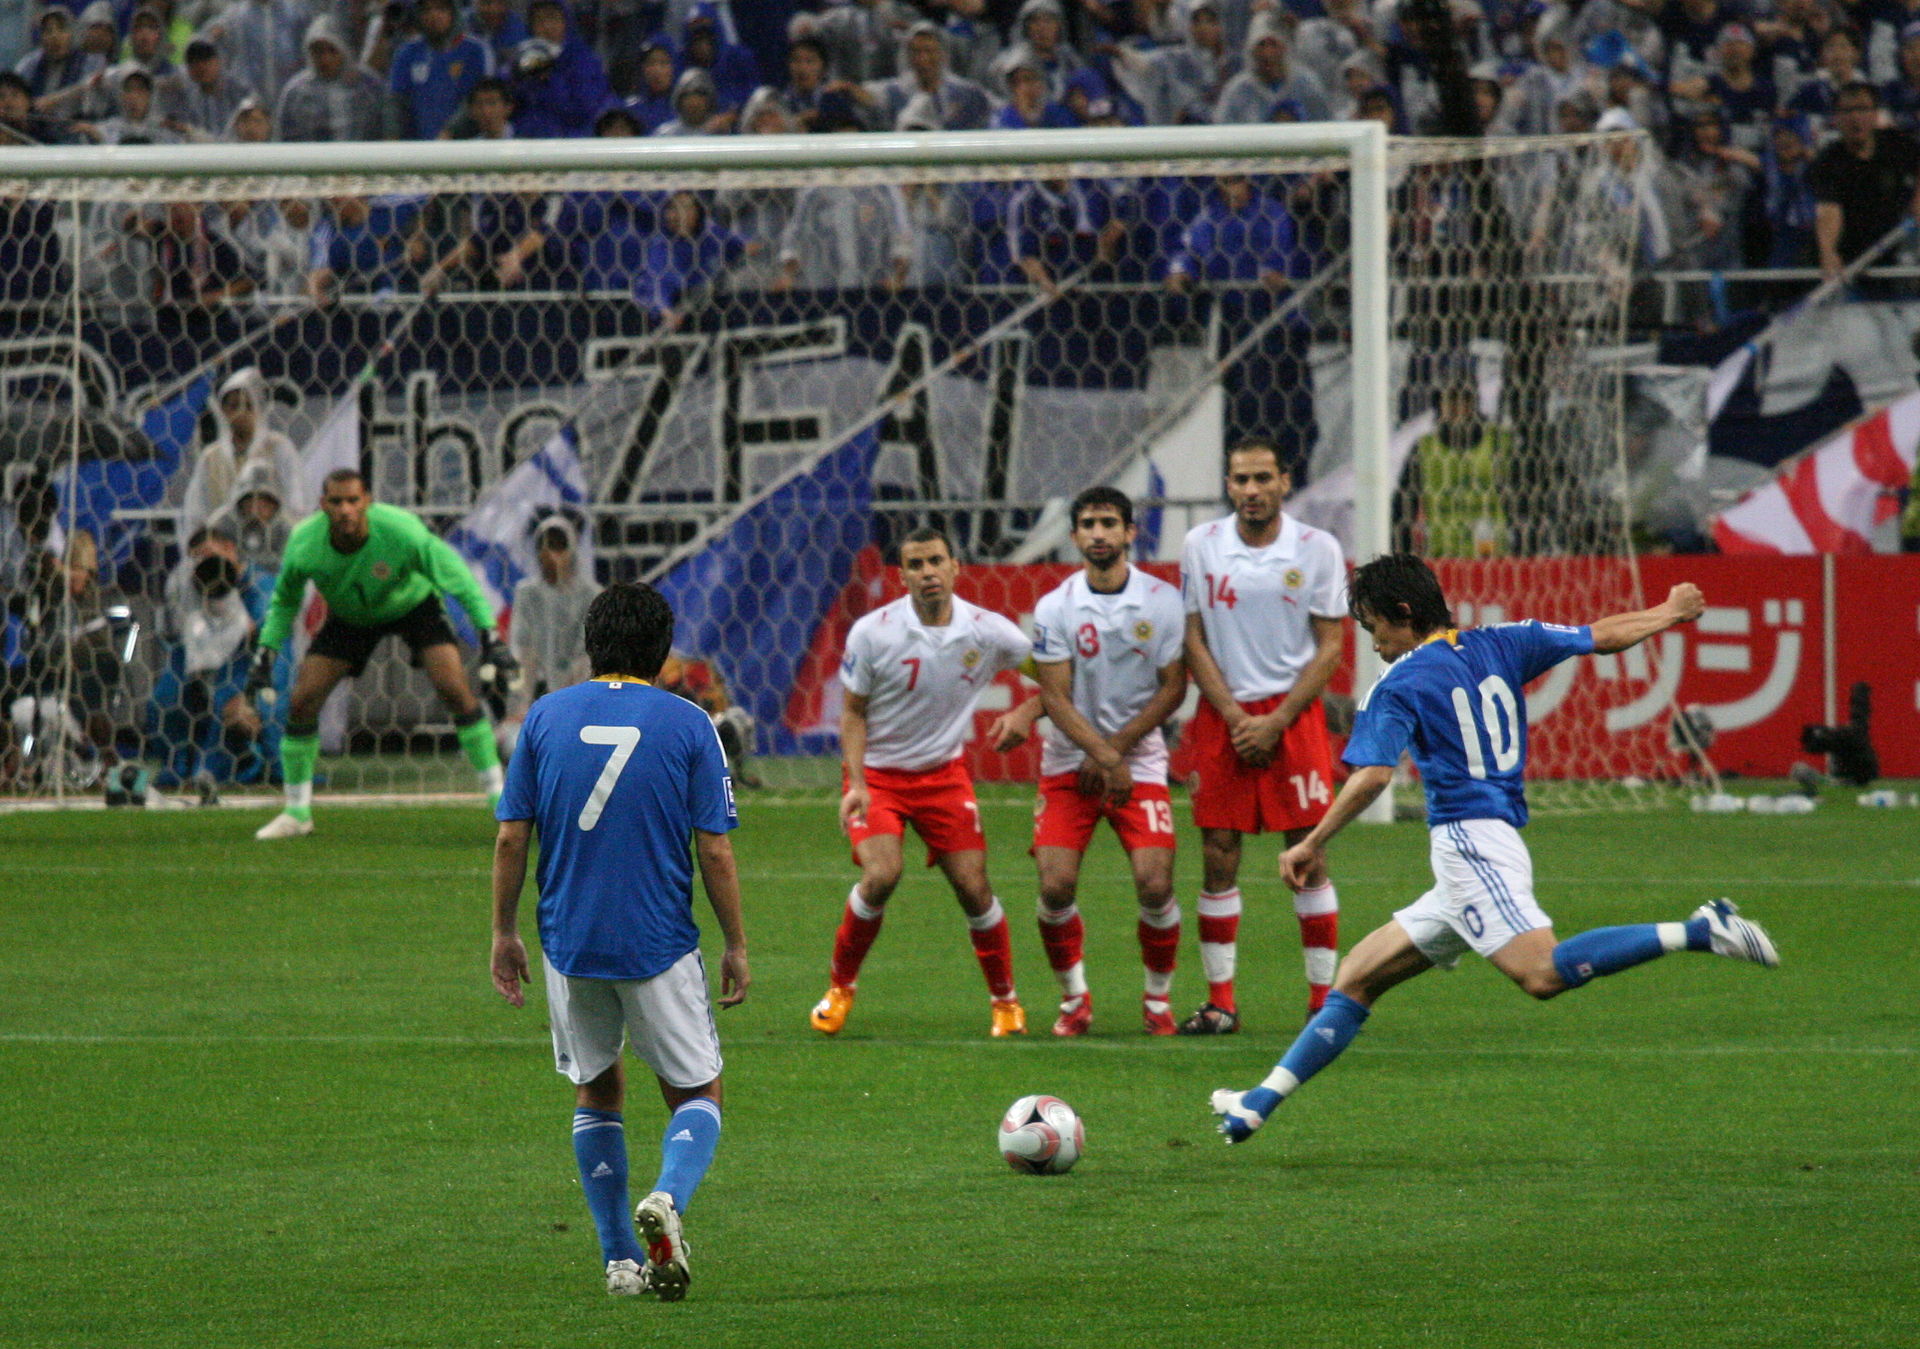 A player takes a free kick, while the opposition form a wall